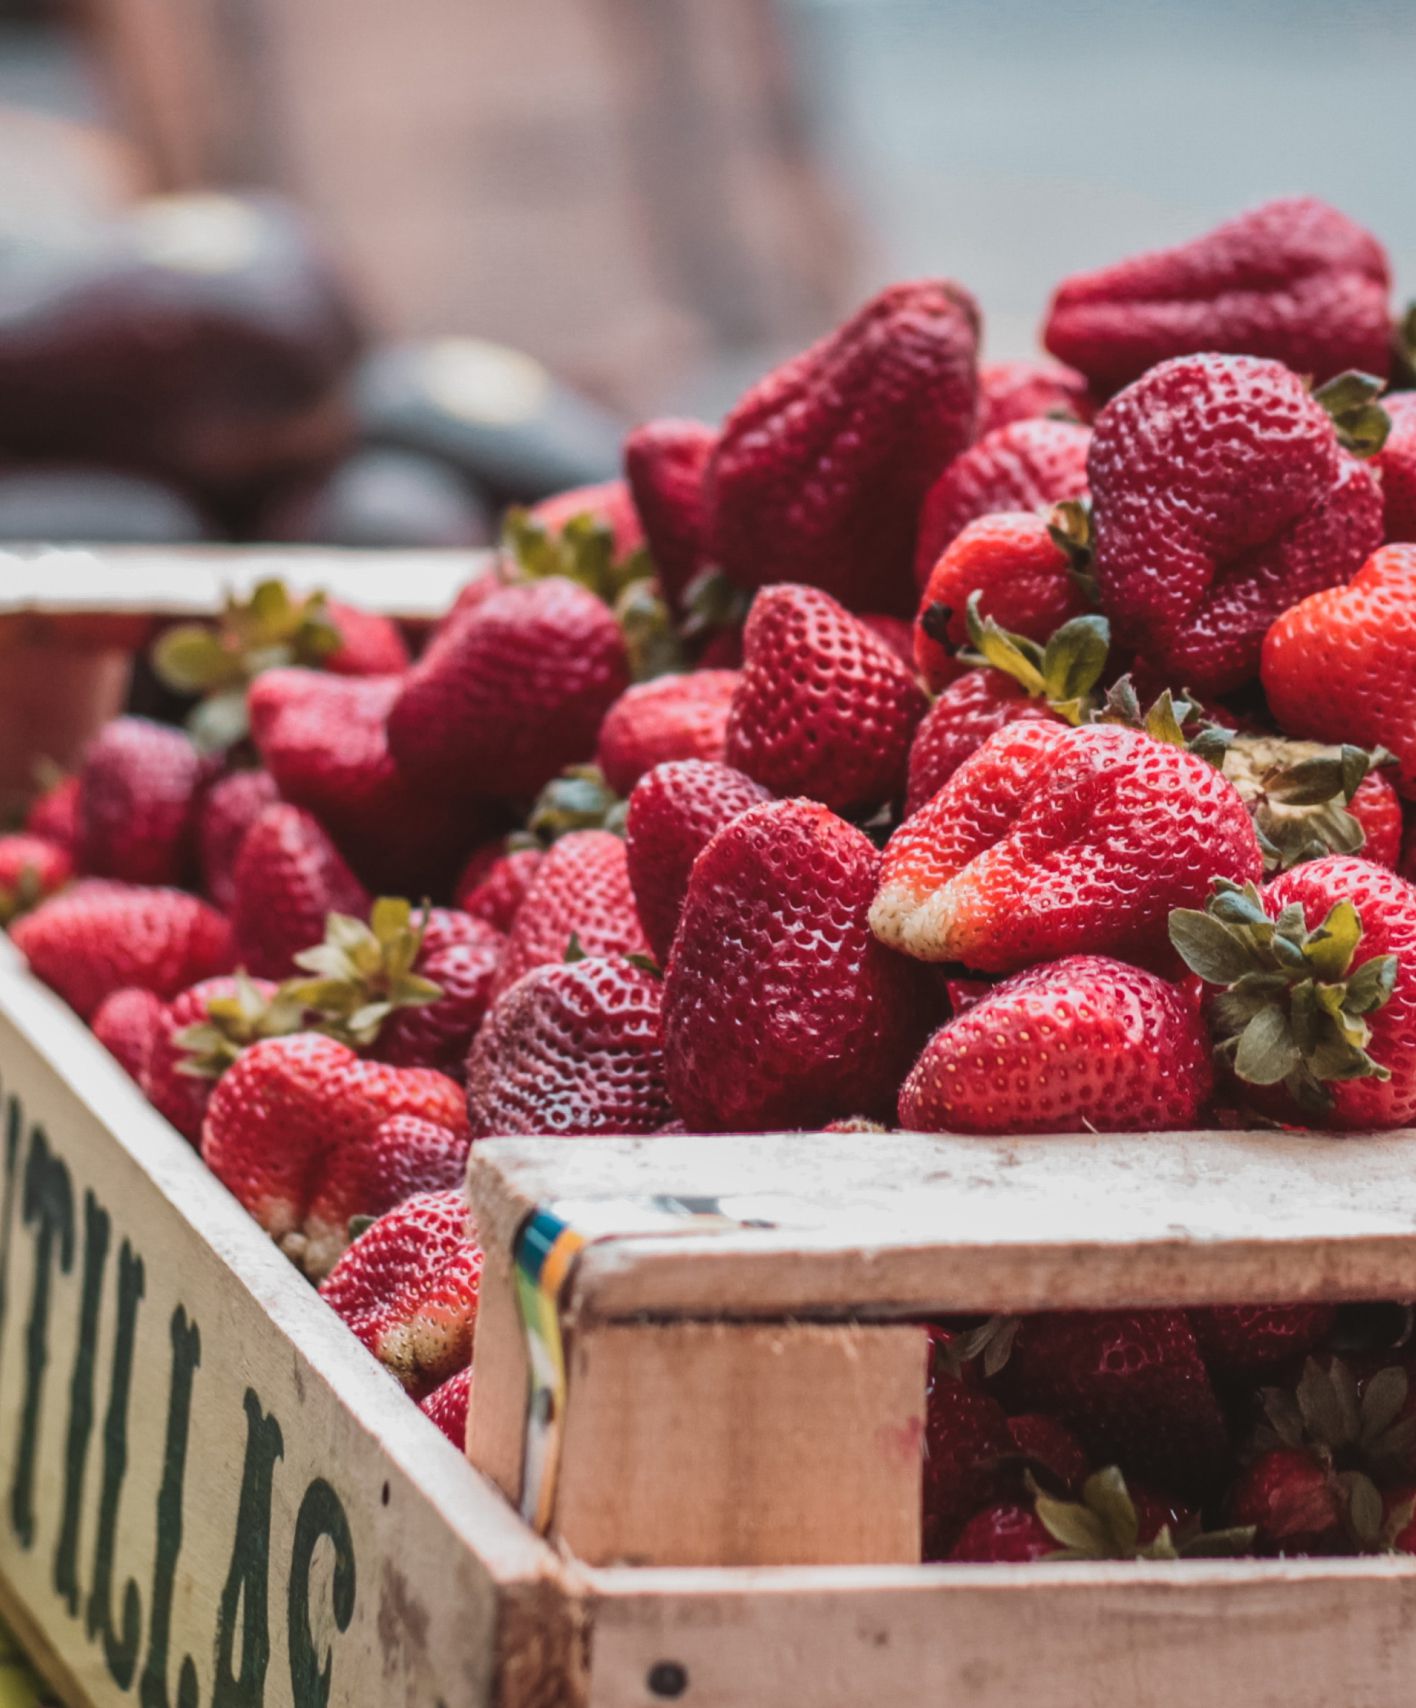 Visit a local farmer’s market or pick your own fruit